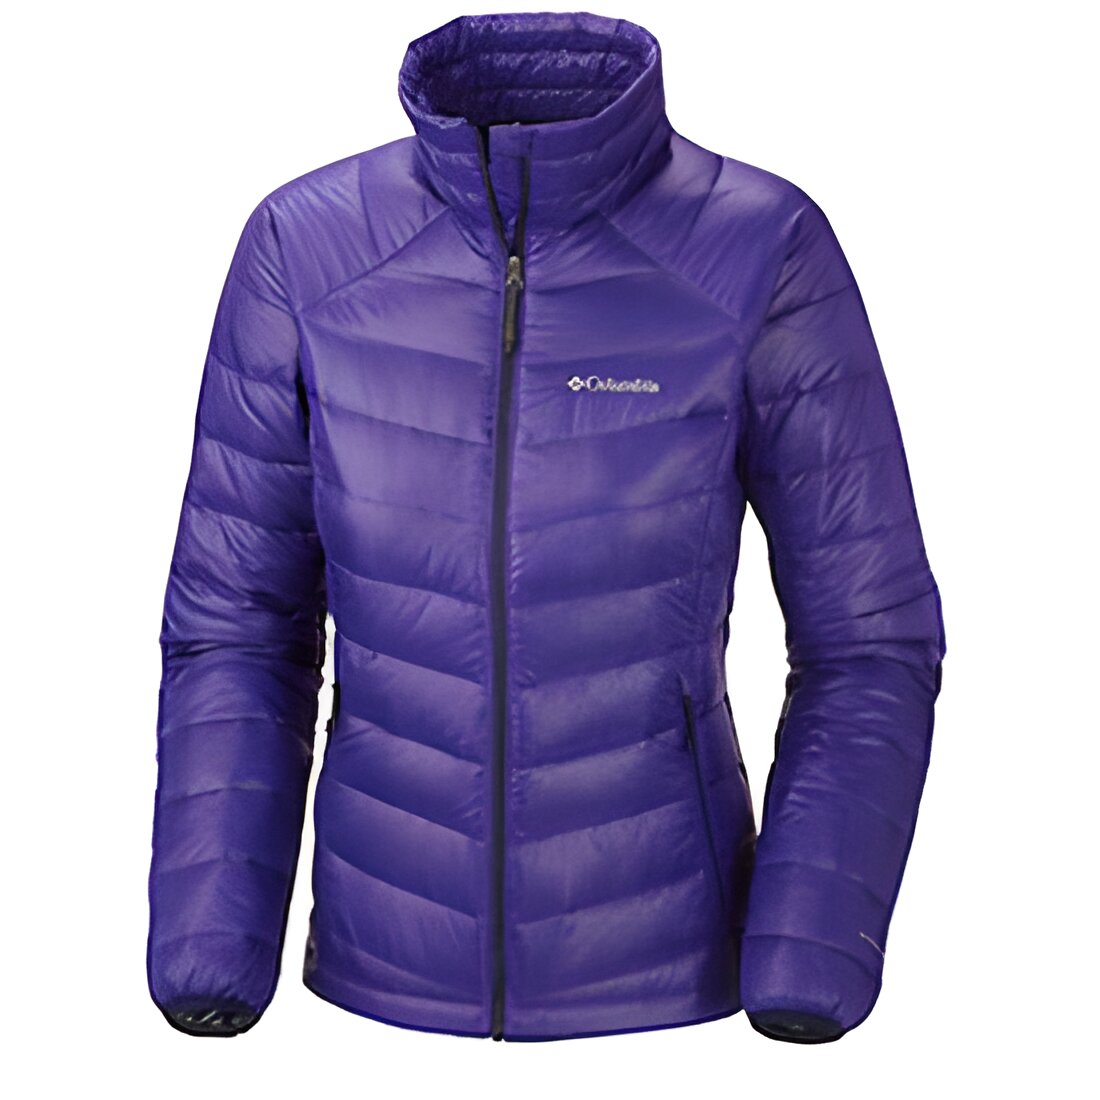 Free Columbia Sportswear Samples For Product Testers